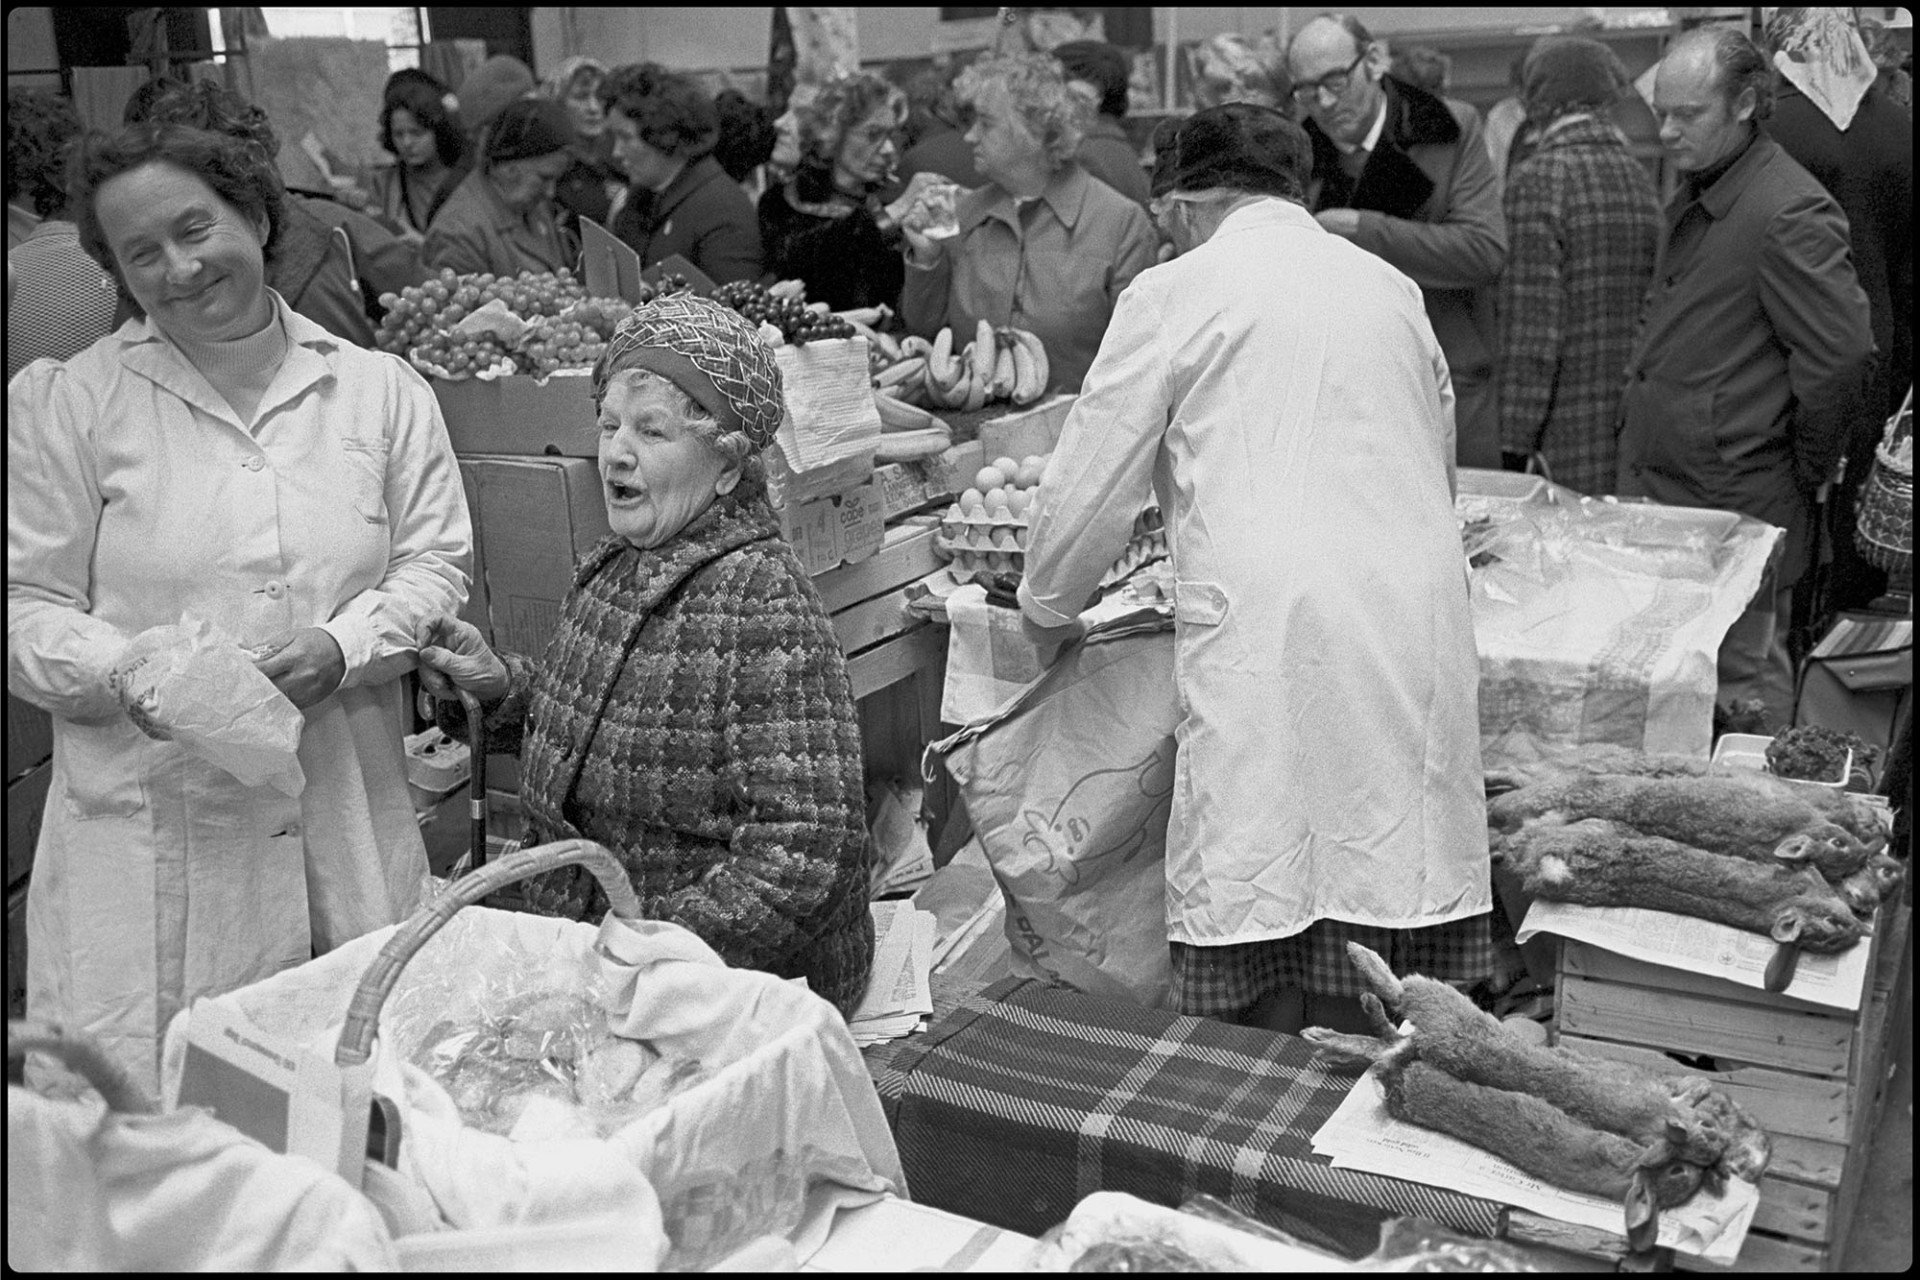 Women chatting at stall in Pannier Market, rabbits.
[Two women chatting at a stall in Barnstaple Pannier Market.  Behind them are stalls selling eggs, rabbits and fruit.]